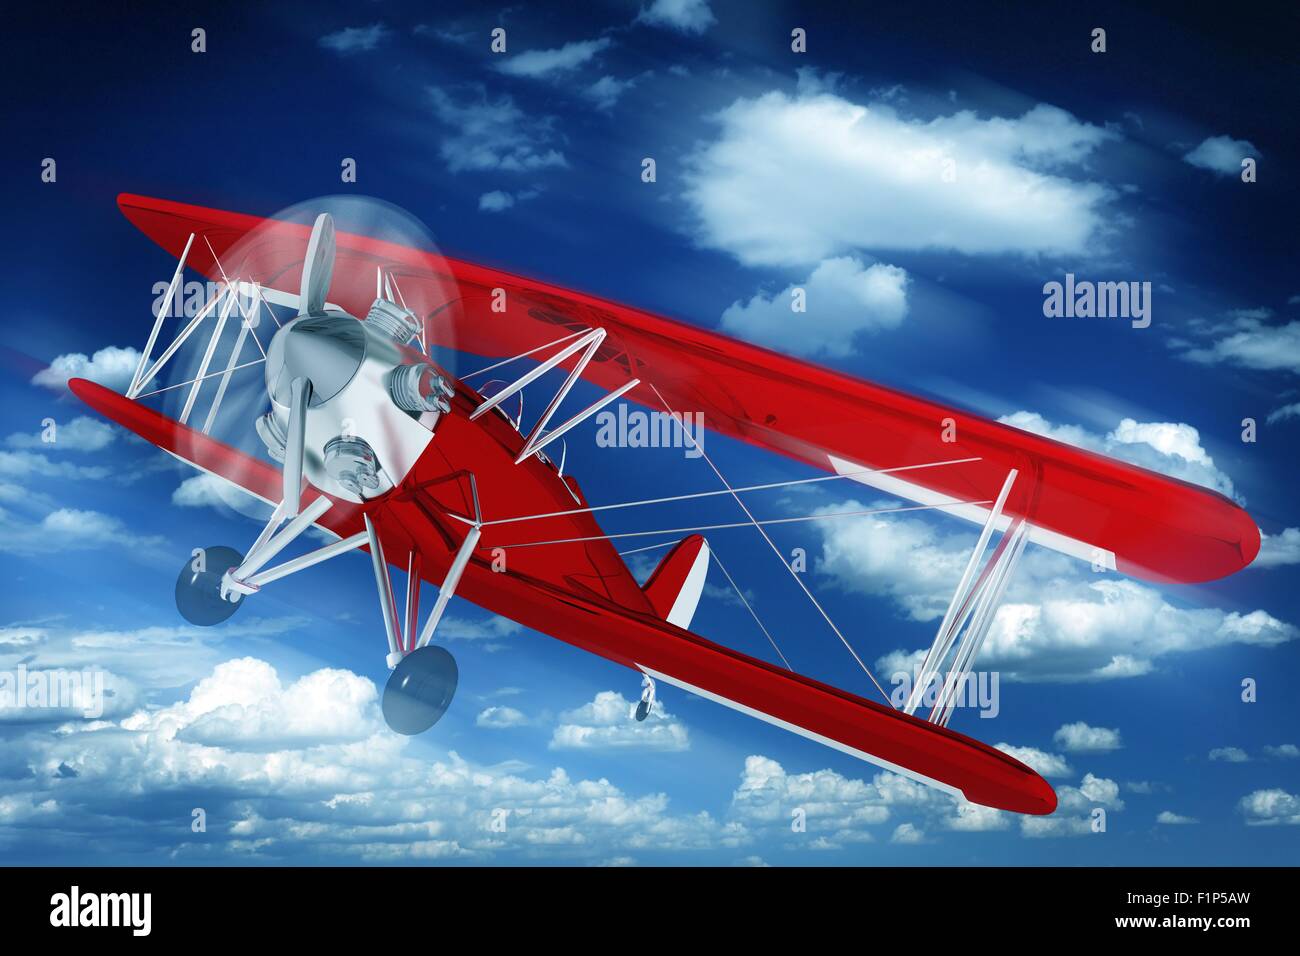 Red Biplane on the Sky. Aeroplane Illustration. 3D Rendered Biplane. Air Transportation Illustration Collection Stock Photo